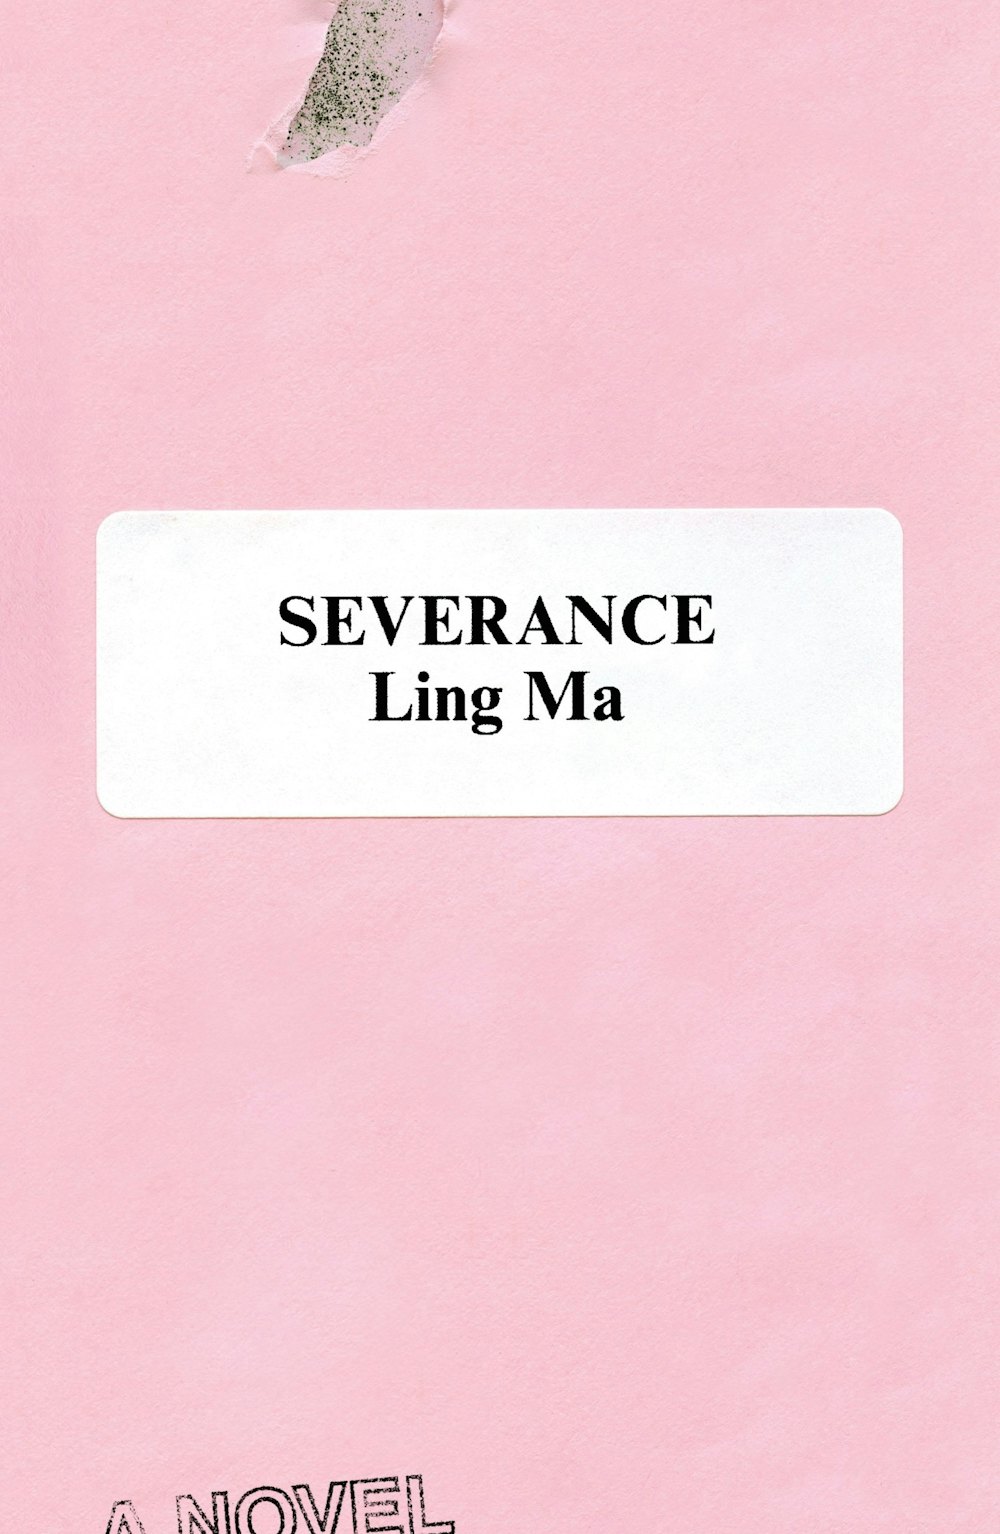 "Severance" by Ling Ma